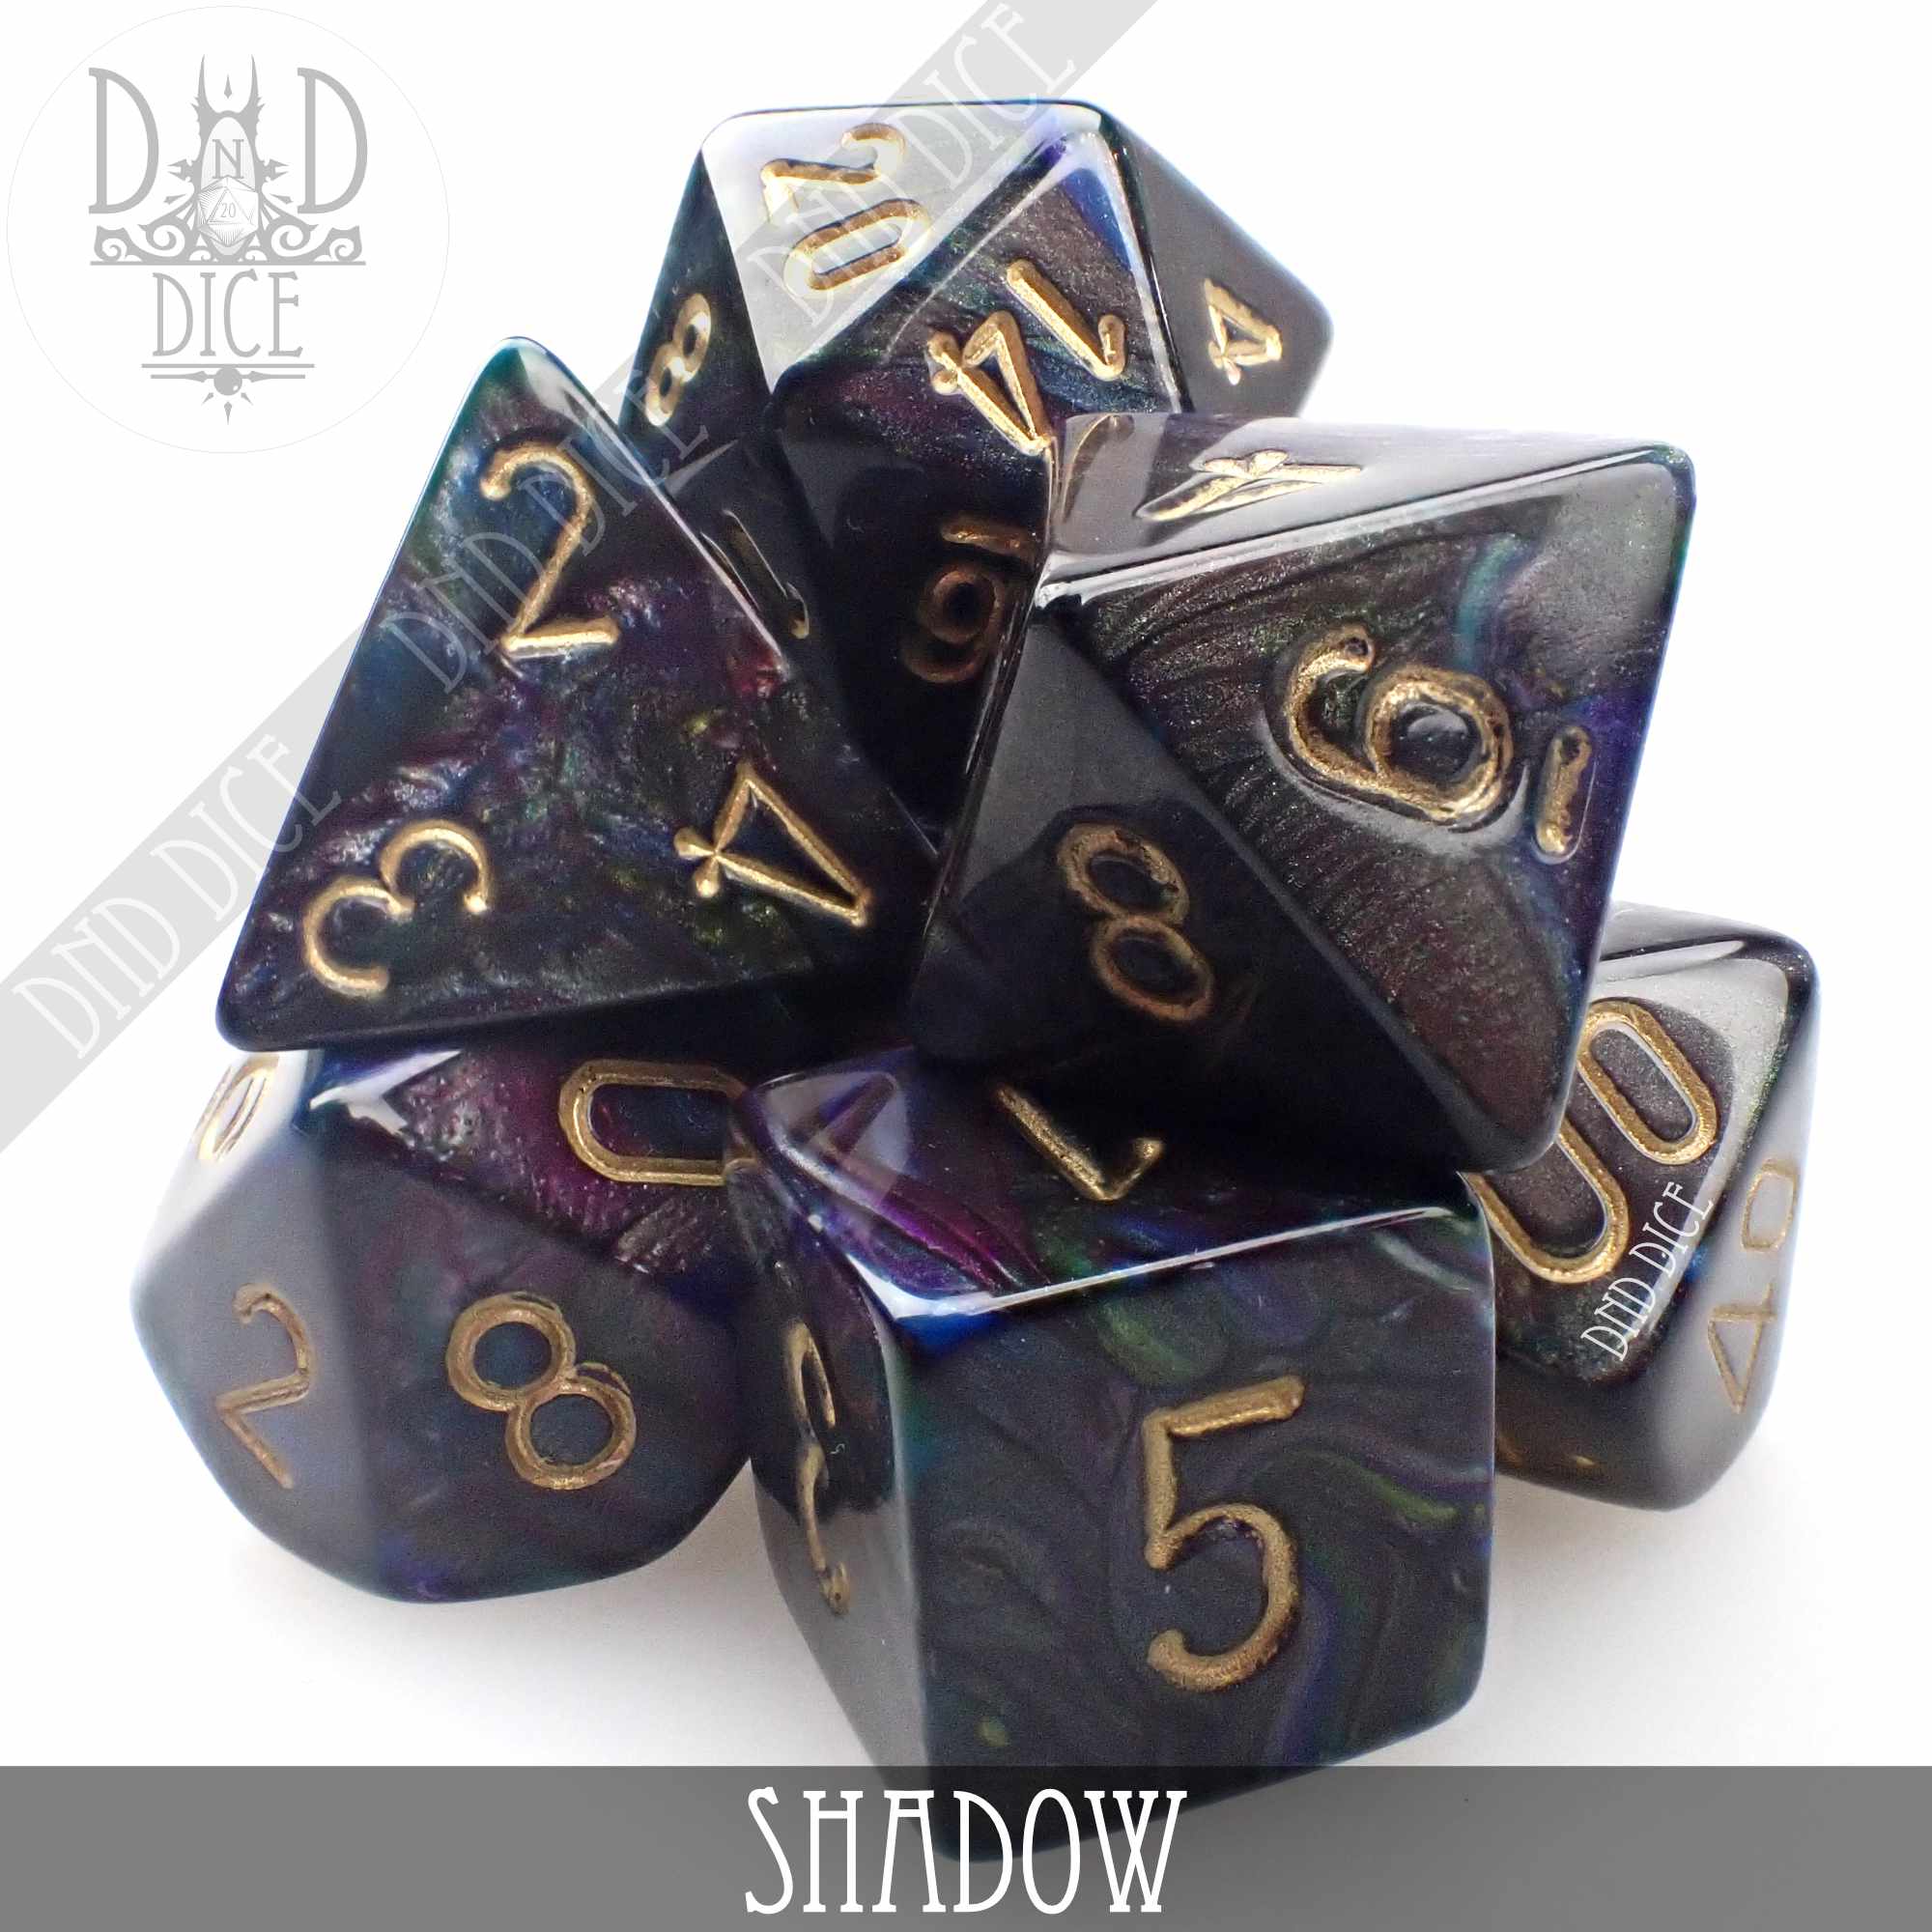 Set of 7-27499 Free Bag DnD Lustrous Shadow w/ Gold Chessex Dice Poly 